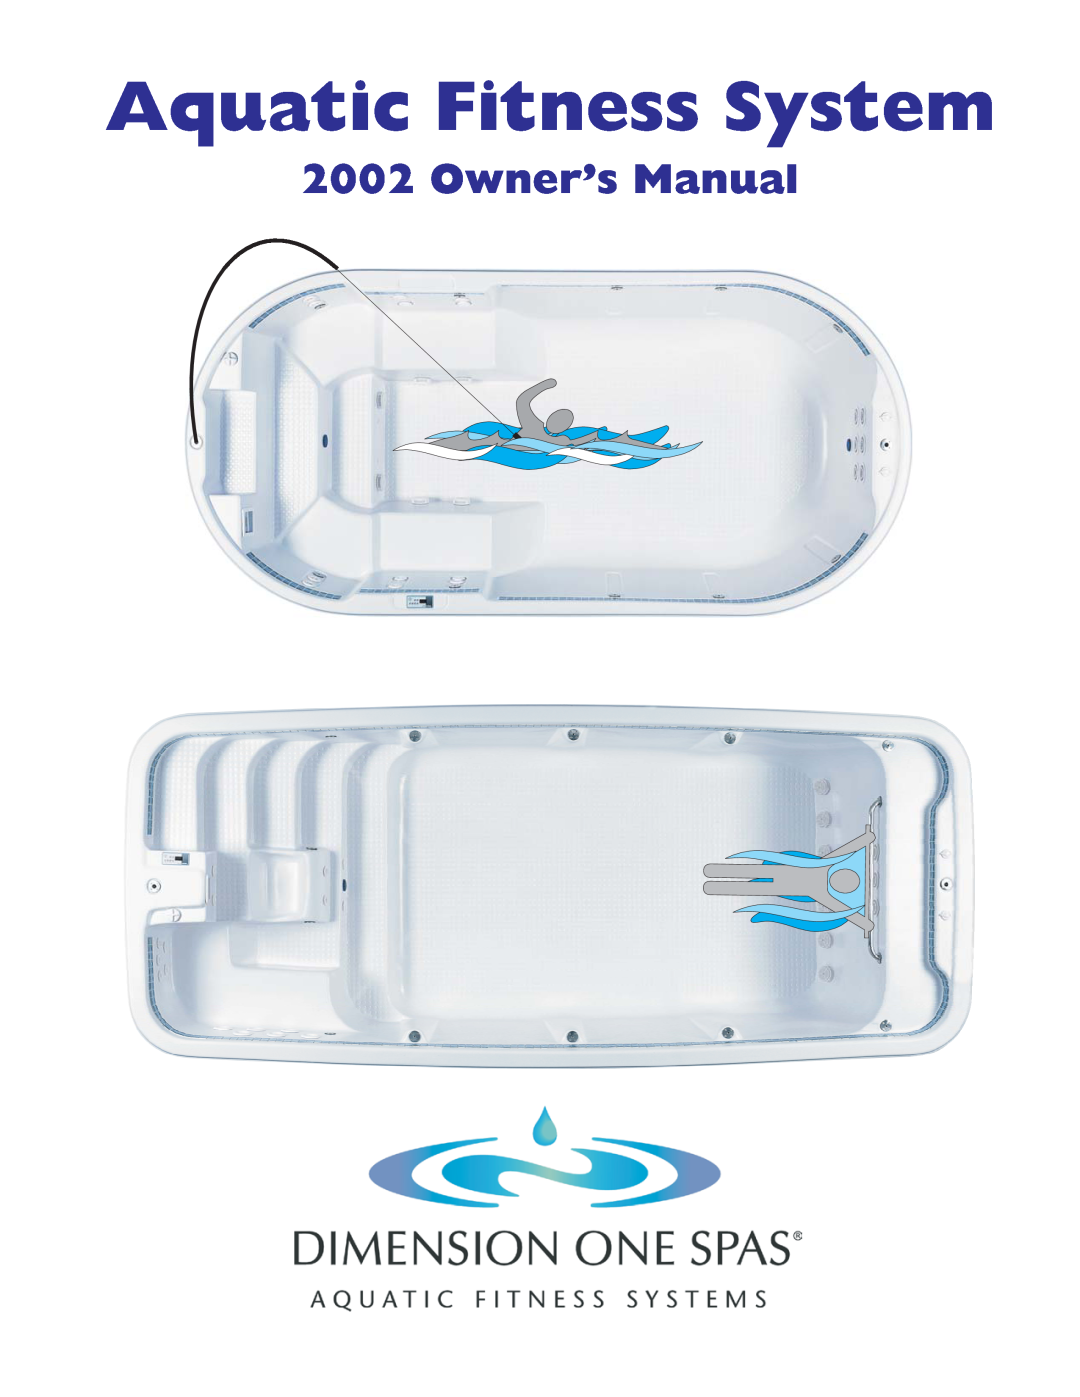 Dimension One Spas Aquatic Fitness System owner manual 